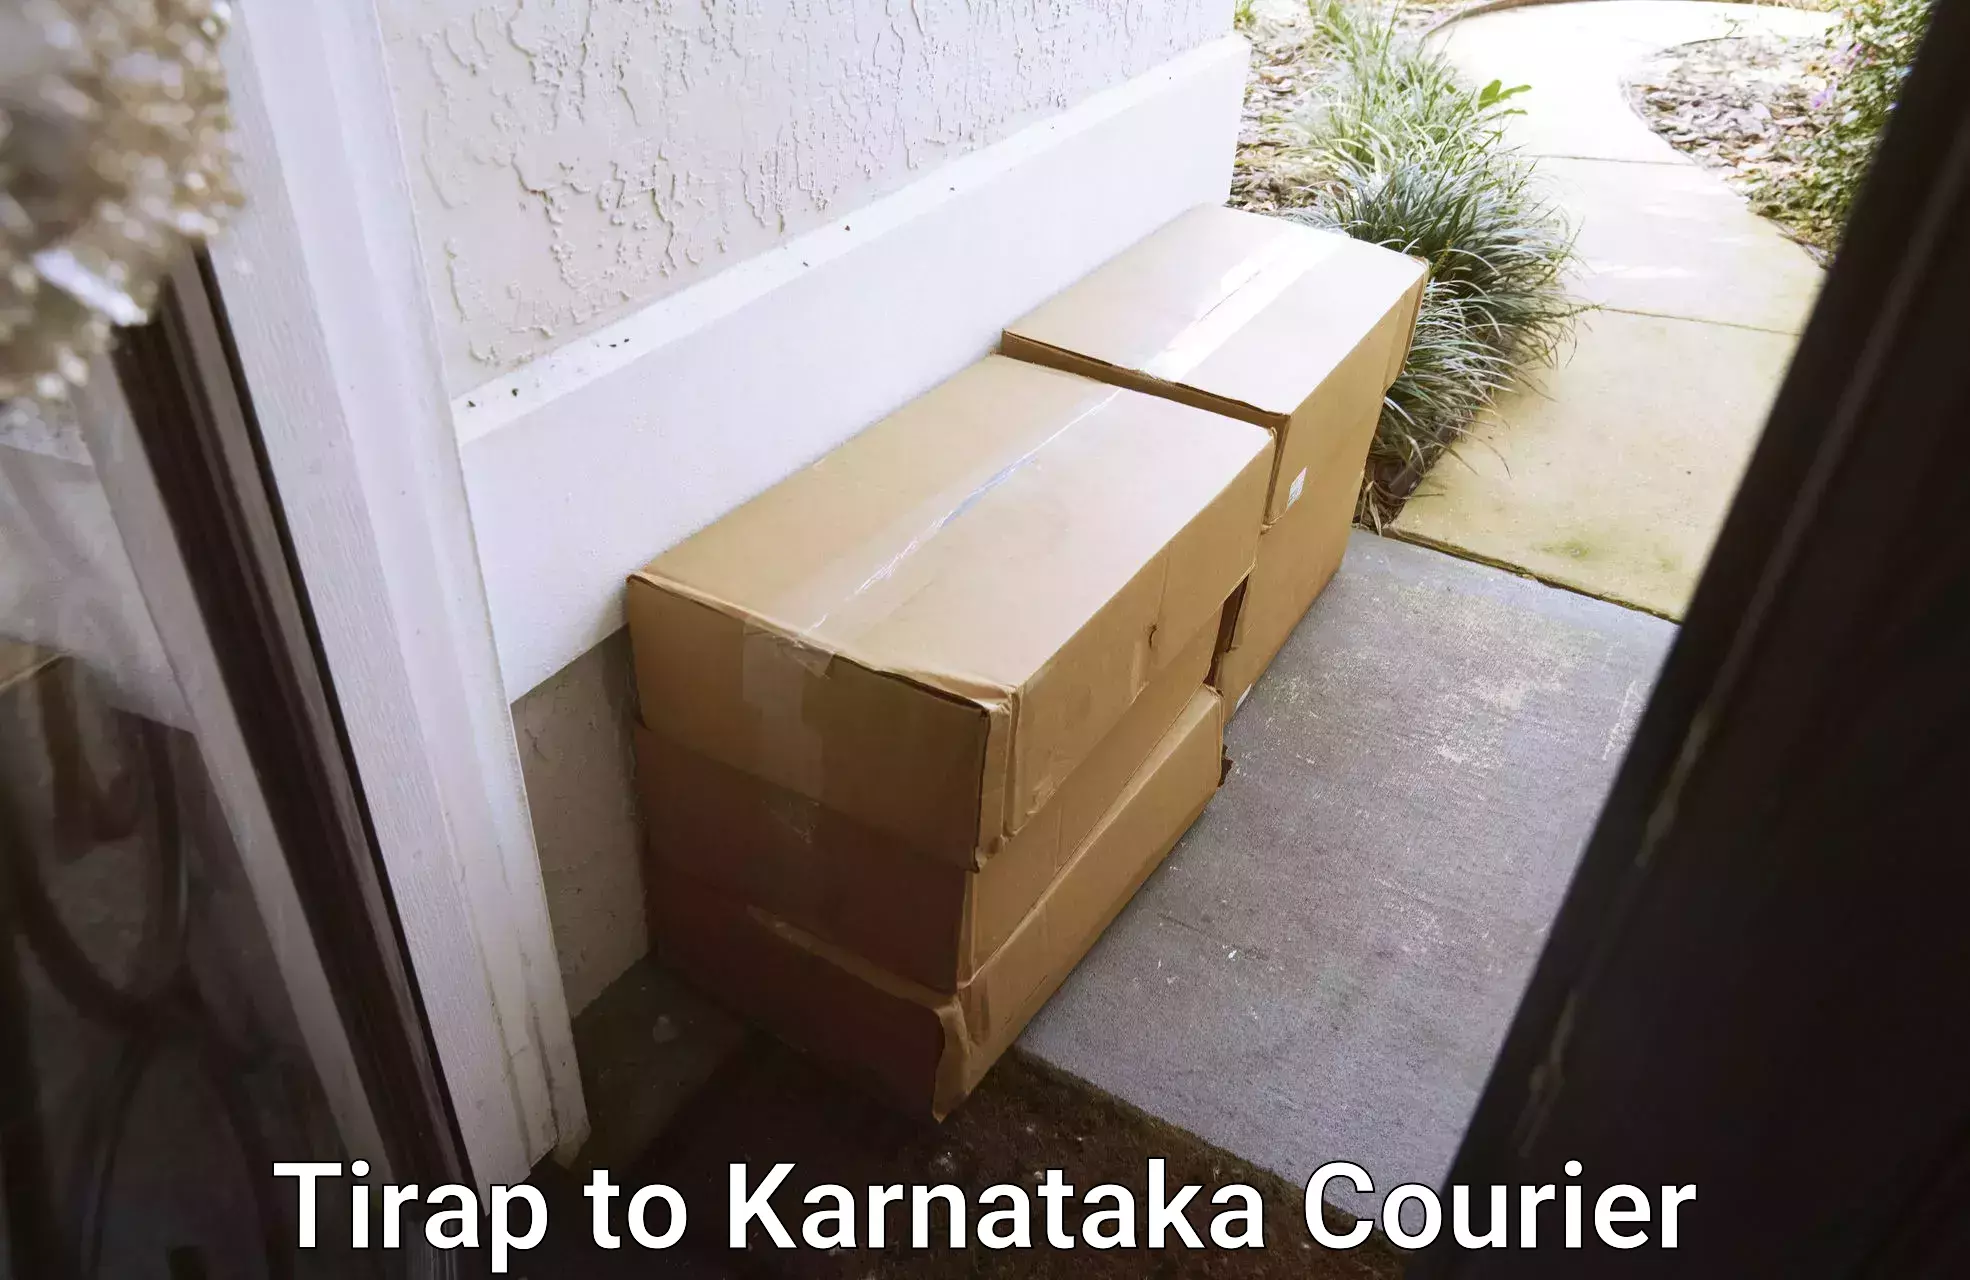 24/7 courier service Tirap to Dharwad